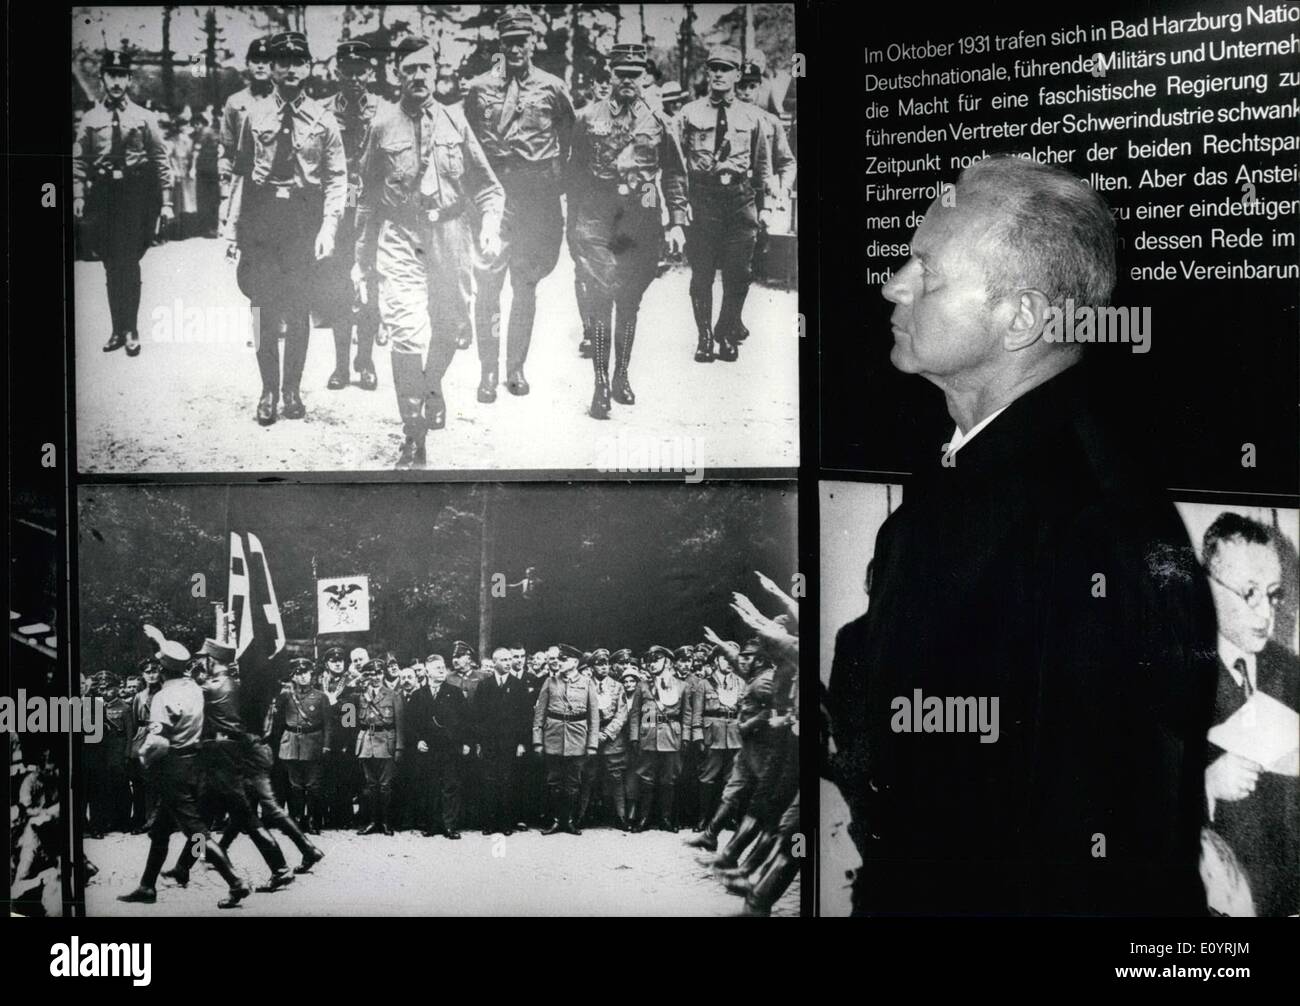 Apr. 04, 1971 - Show ''Antifascist Resistance'' in Munich: So far 10,000 visitors and 56 dorms have been to the show ''Antifascist Resistance'' since April 14th in a museum in Munich (Germany). It had bee financed by Munich and Private donors and reminds with some hundred pictures of the beginning of the ''1000-year-old Reich'', (some photos), but mainly of the resistance against the Nazim and the concentration camps Stock Photo